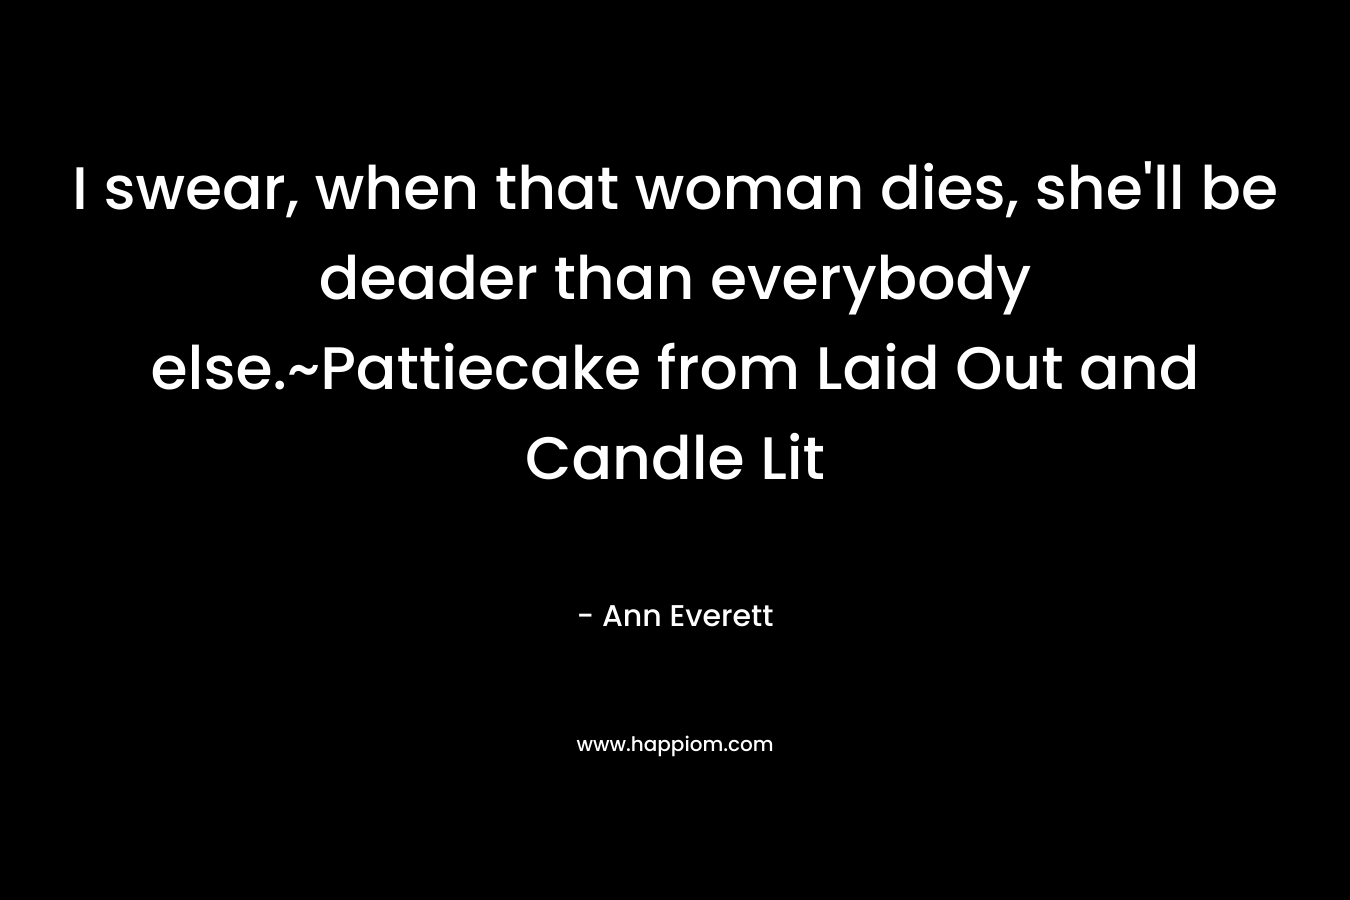 I swear, when that woman dies, she'll be deader than everybody else.~Pattiecake from Laid Out and Candle Lit